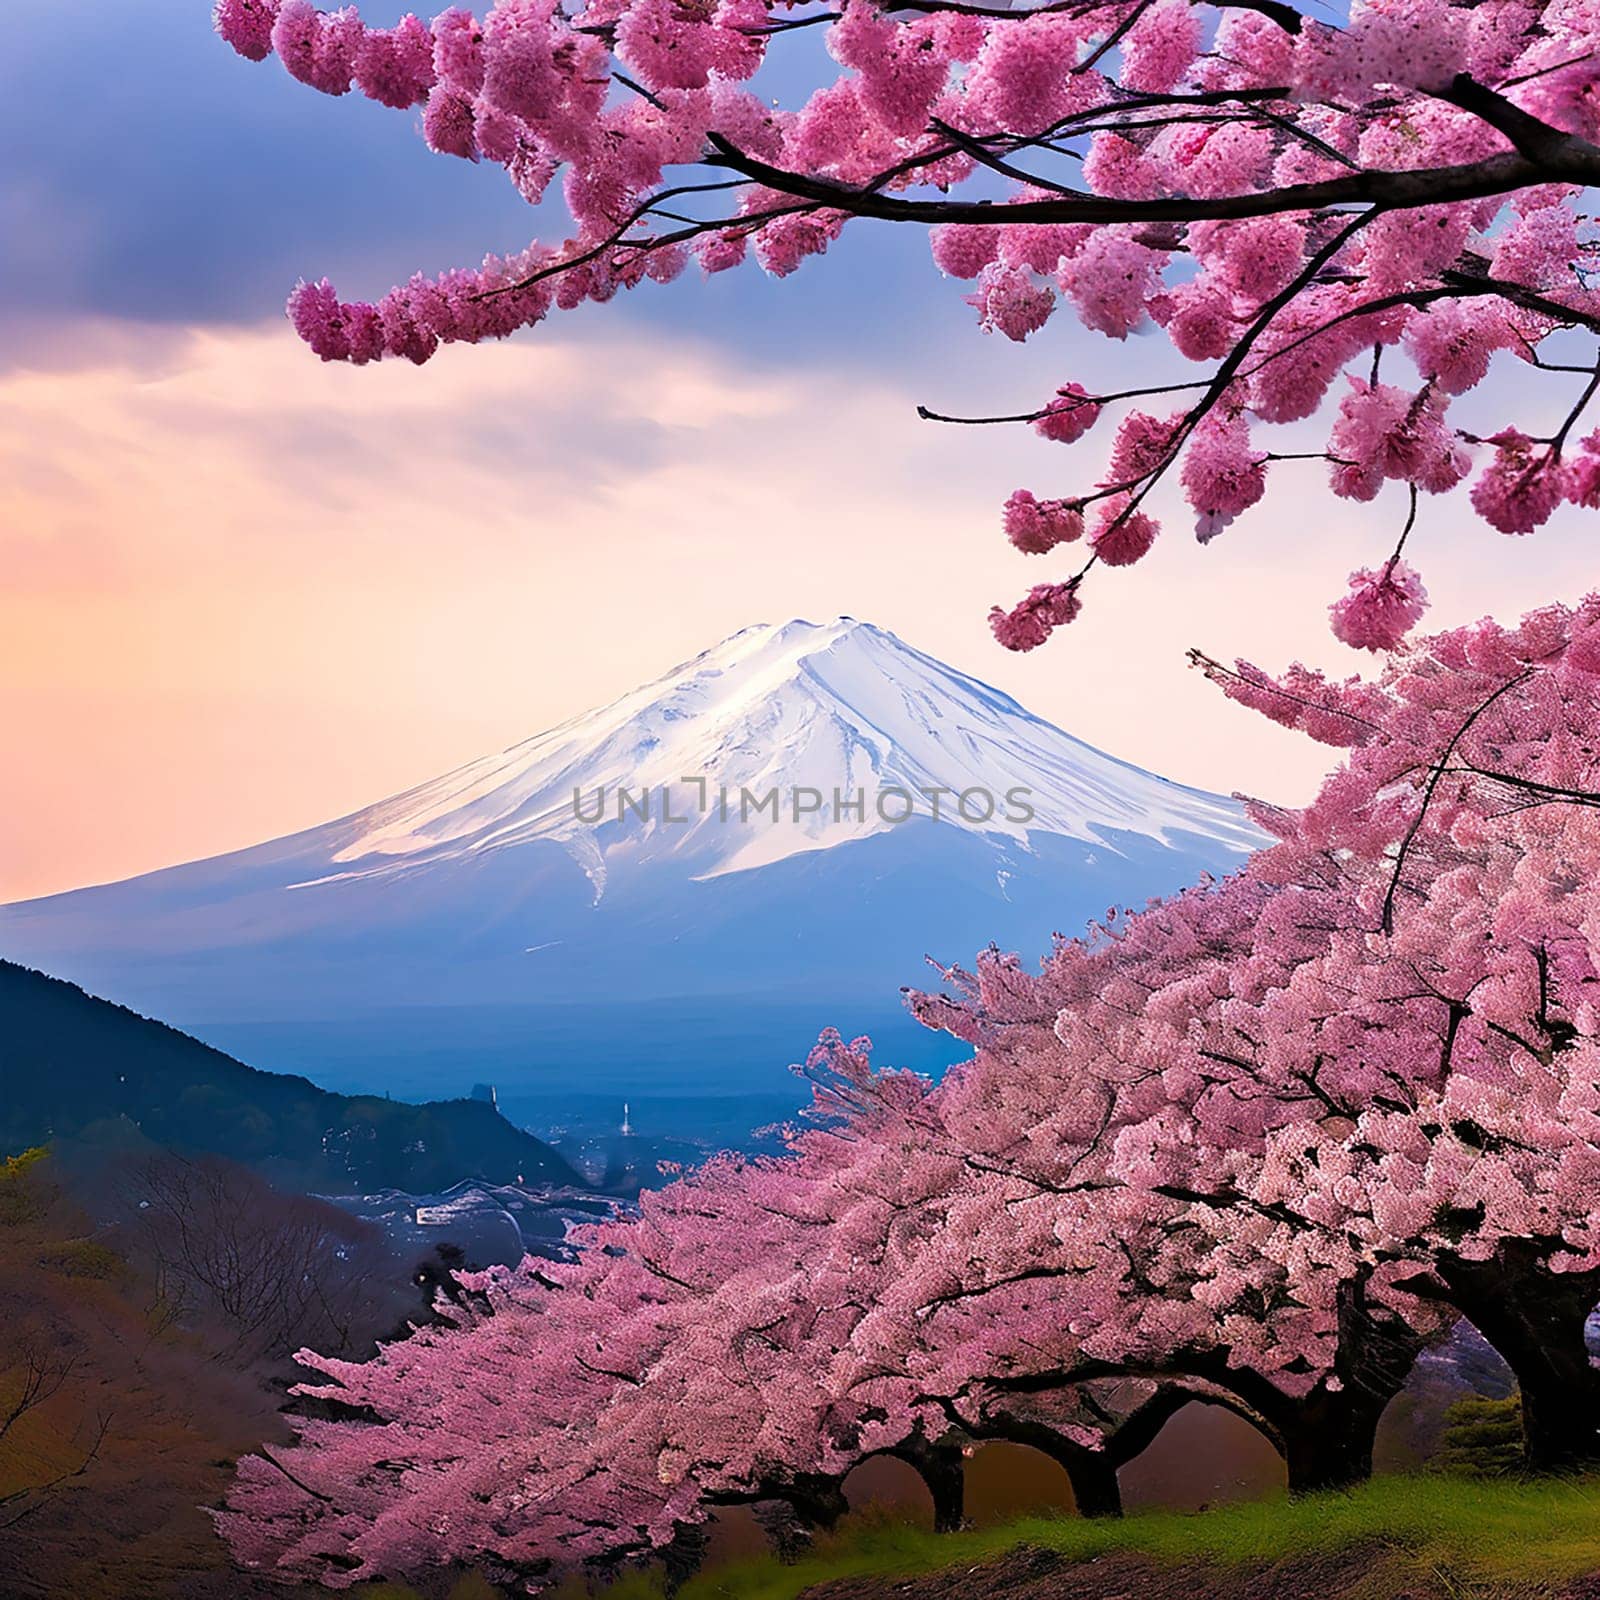 Japan's Spring Canvas: Fuji Mountain and Cherry Blossoms by Petrichor